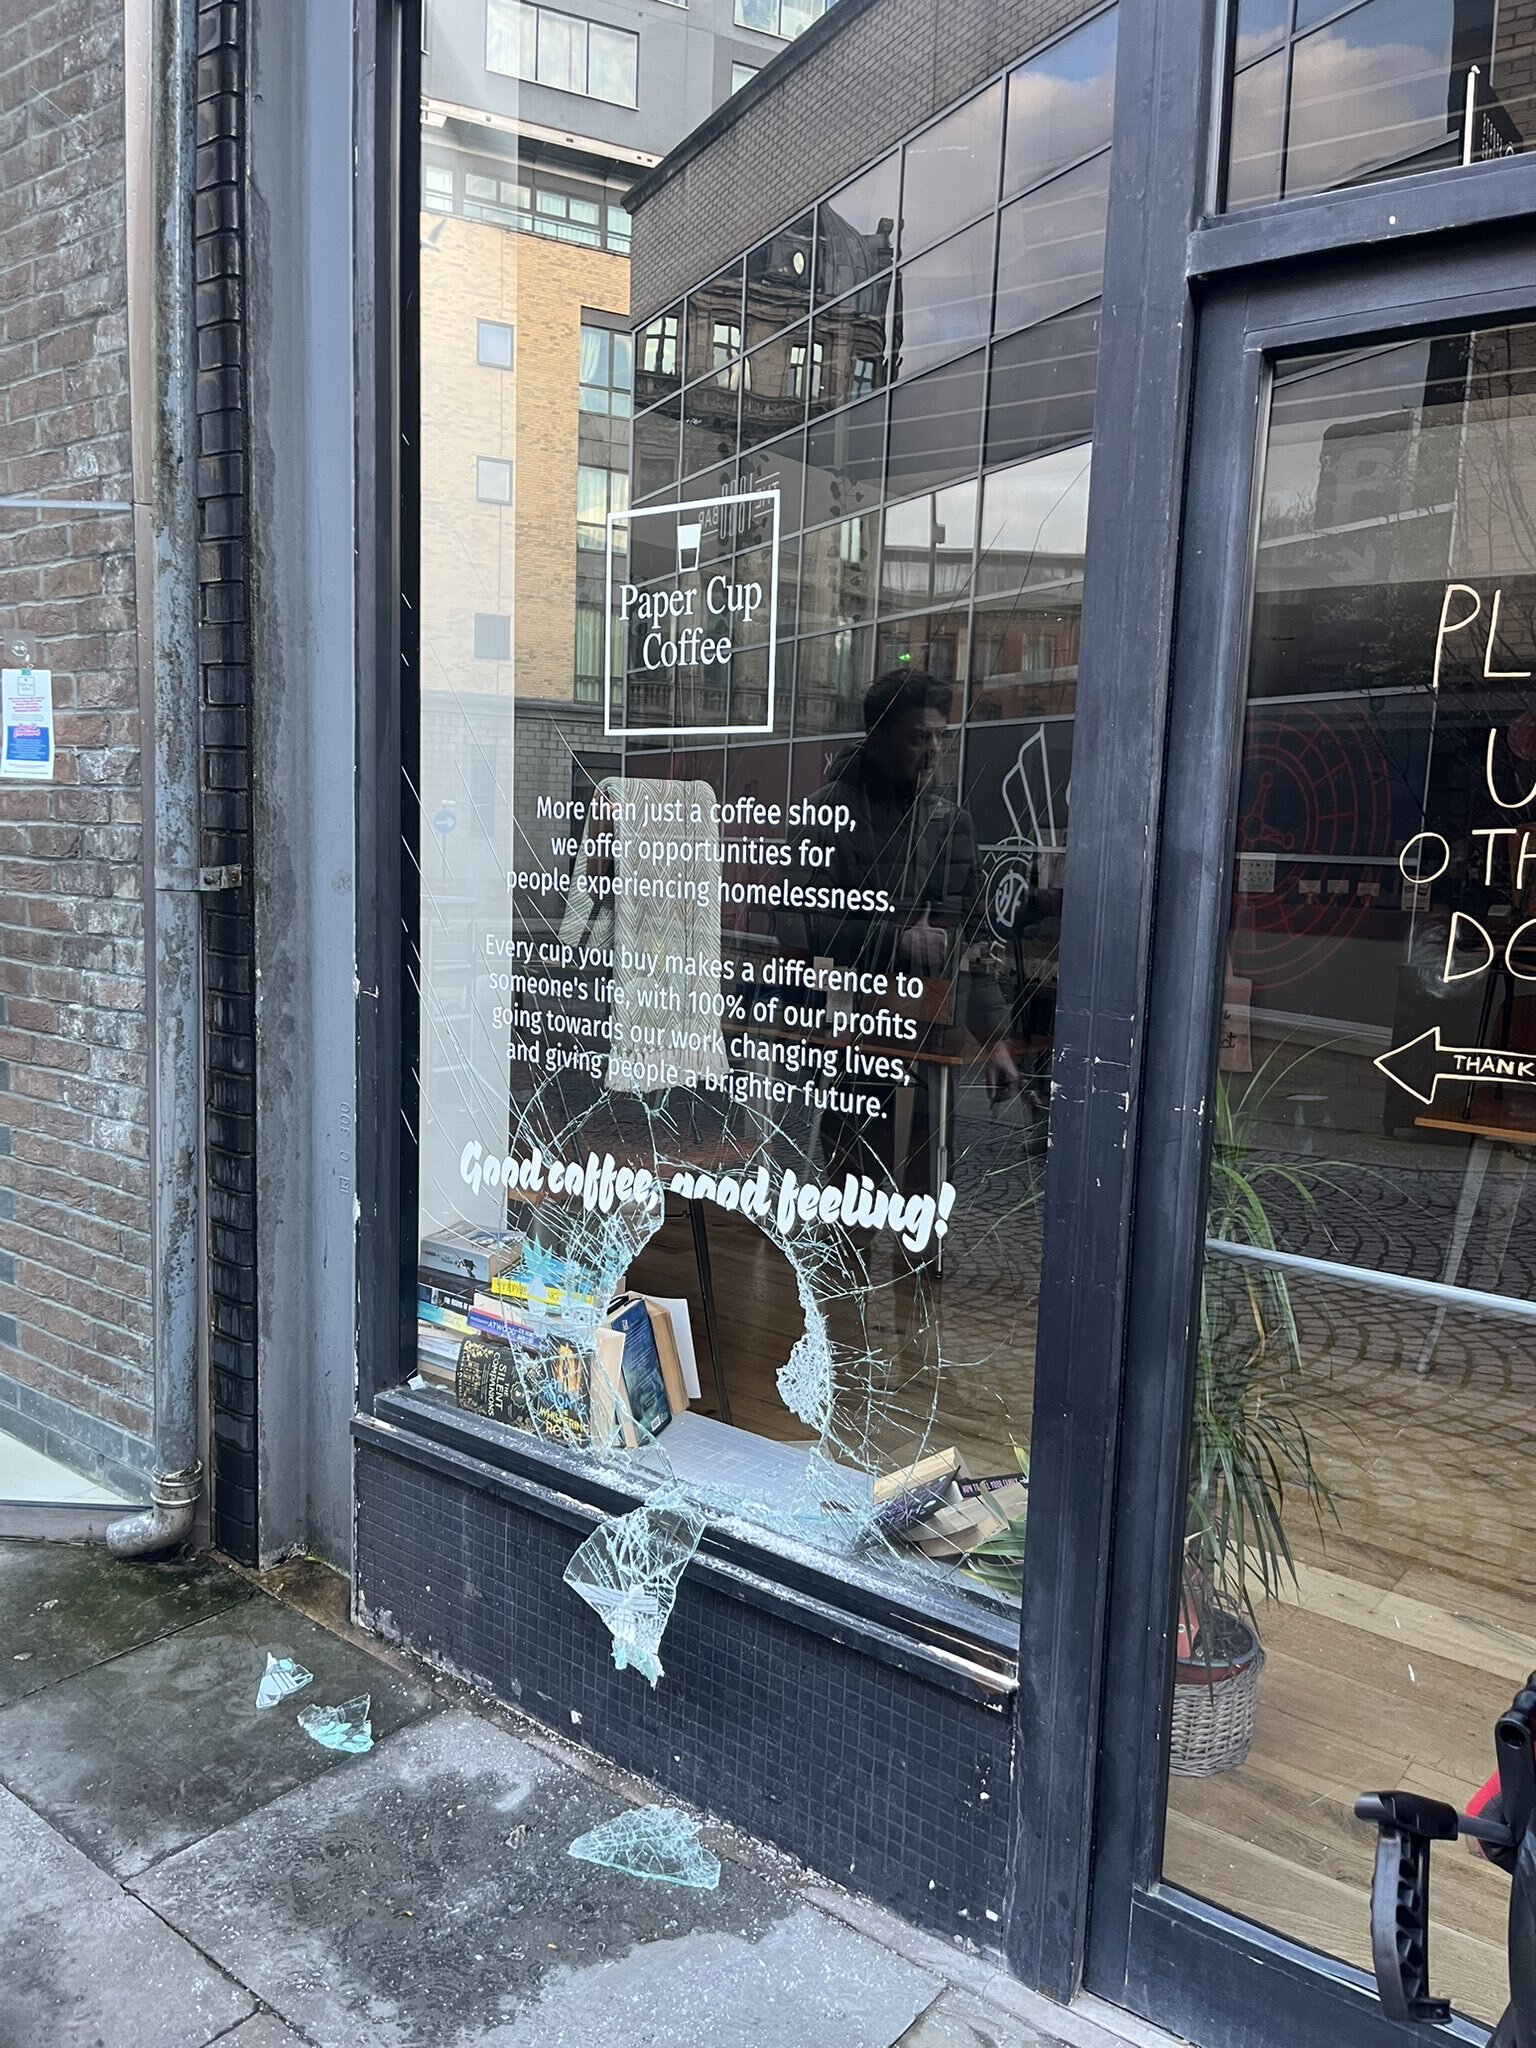 Liverpool charity café fundraising for shutters after three break-ins in two weeks